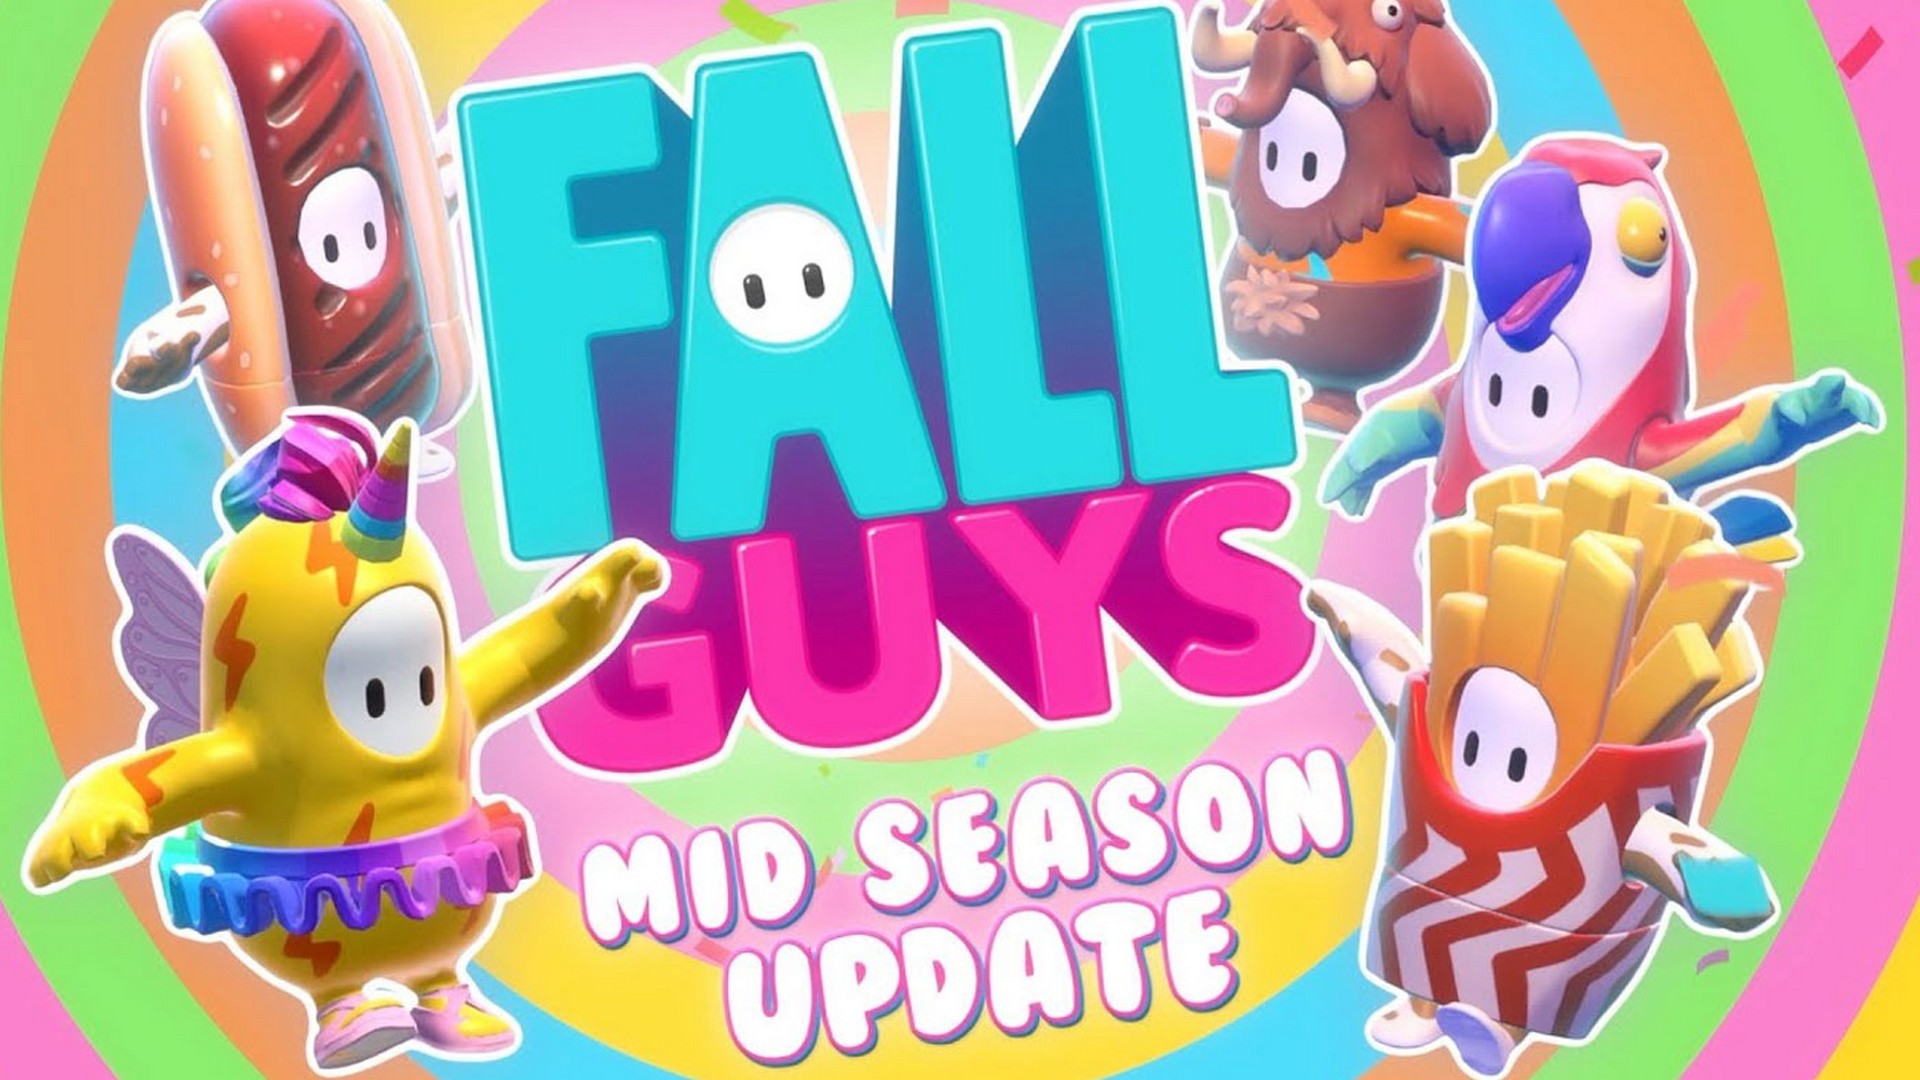 Fall Guys ‘Season 2.5’ Update Drops An All-New Round & The Wildest Obstacle Remixes To Date